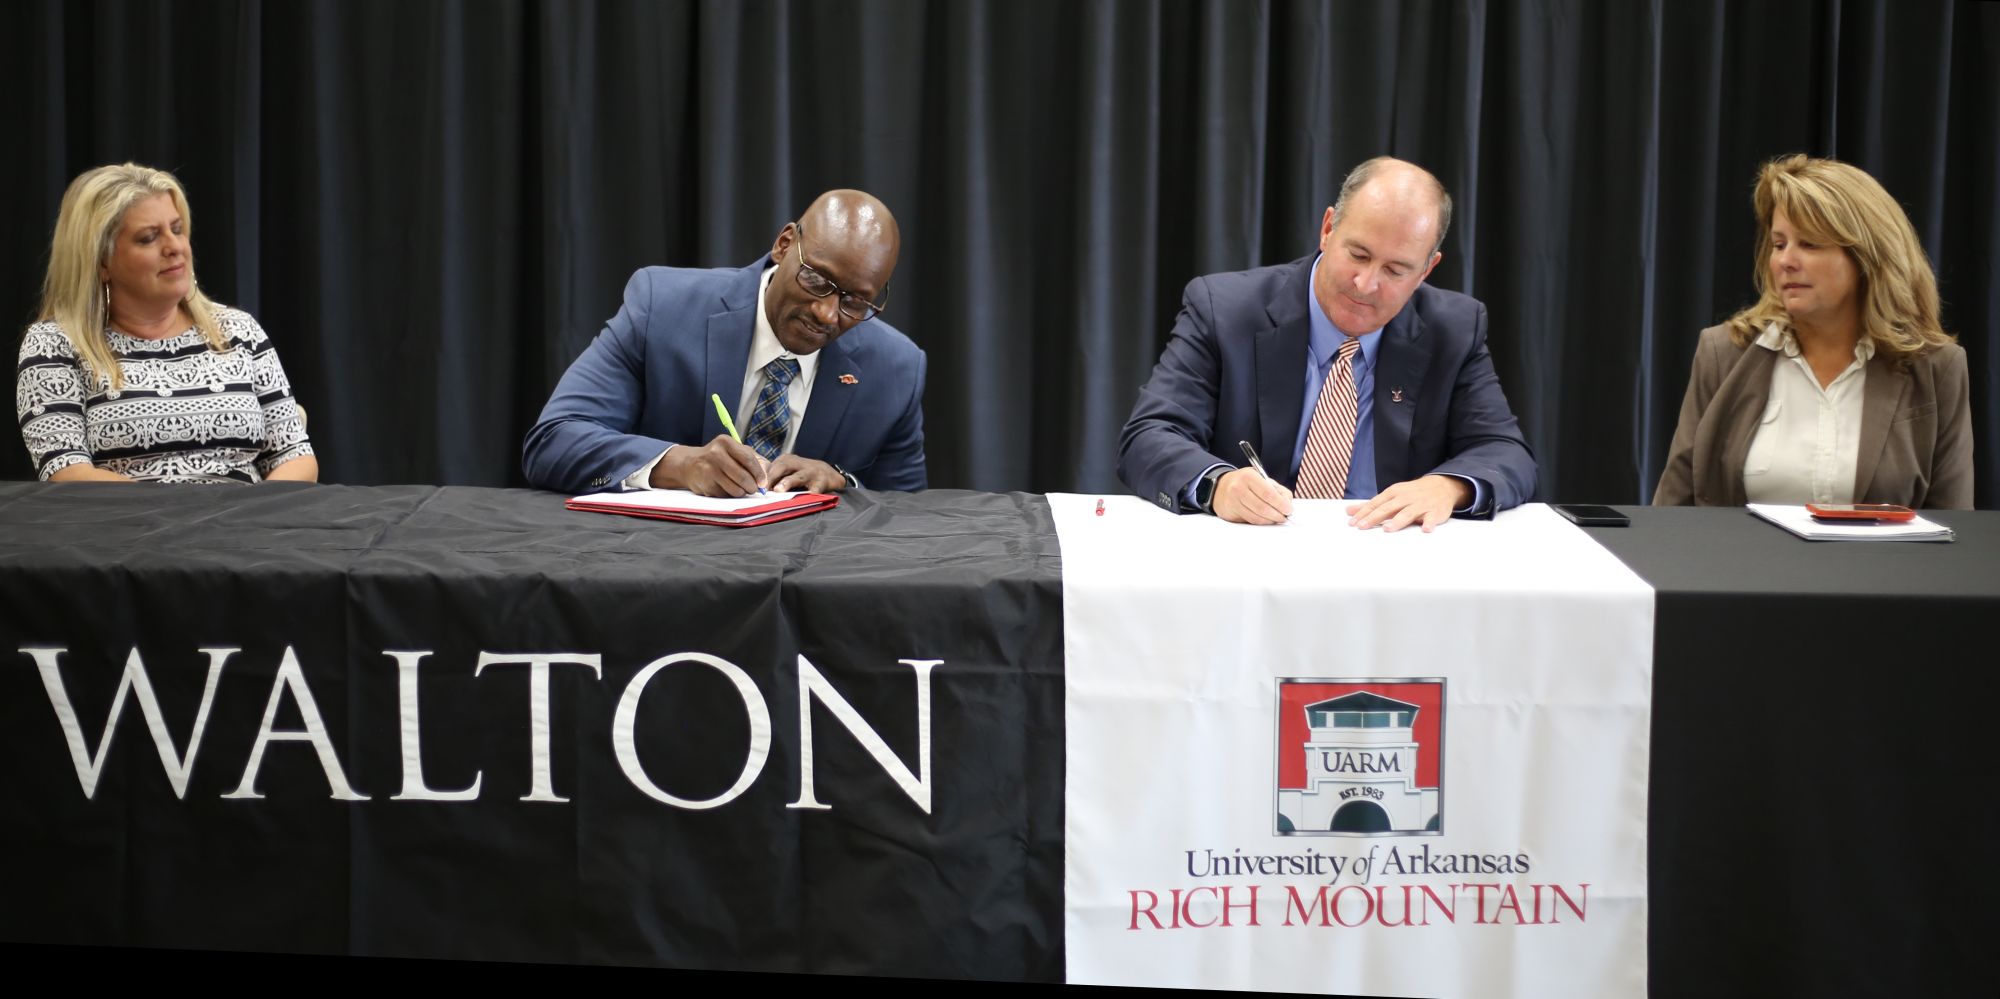 Sam M. Walton College of Business and the University of Arkansas Rich Mountain articulation signing 